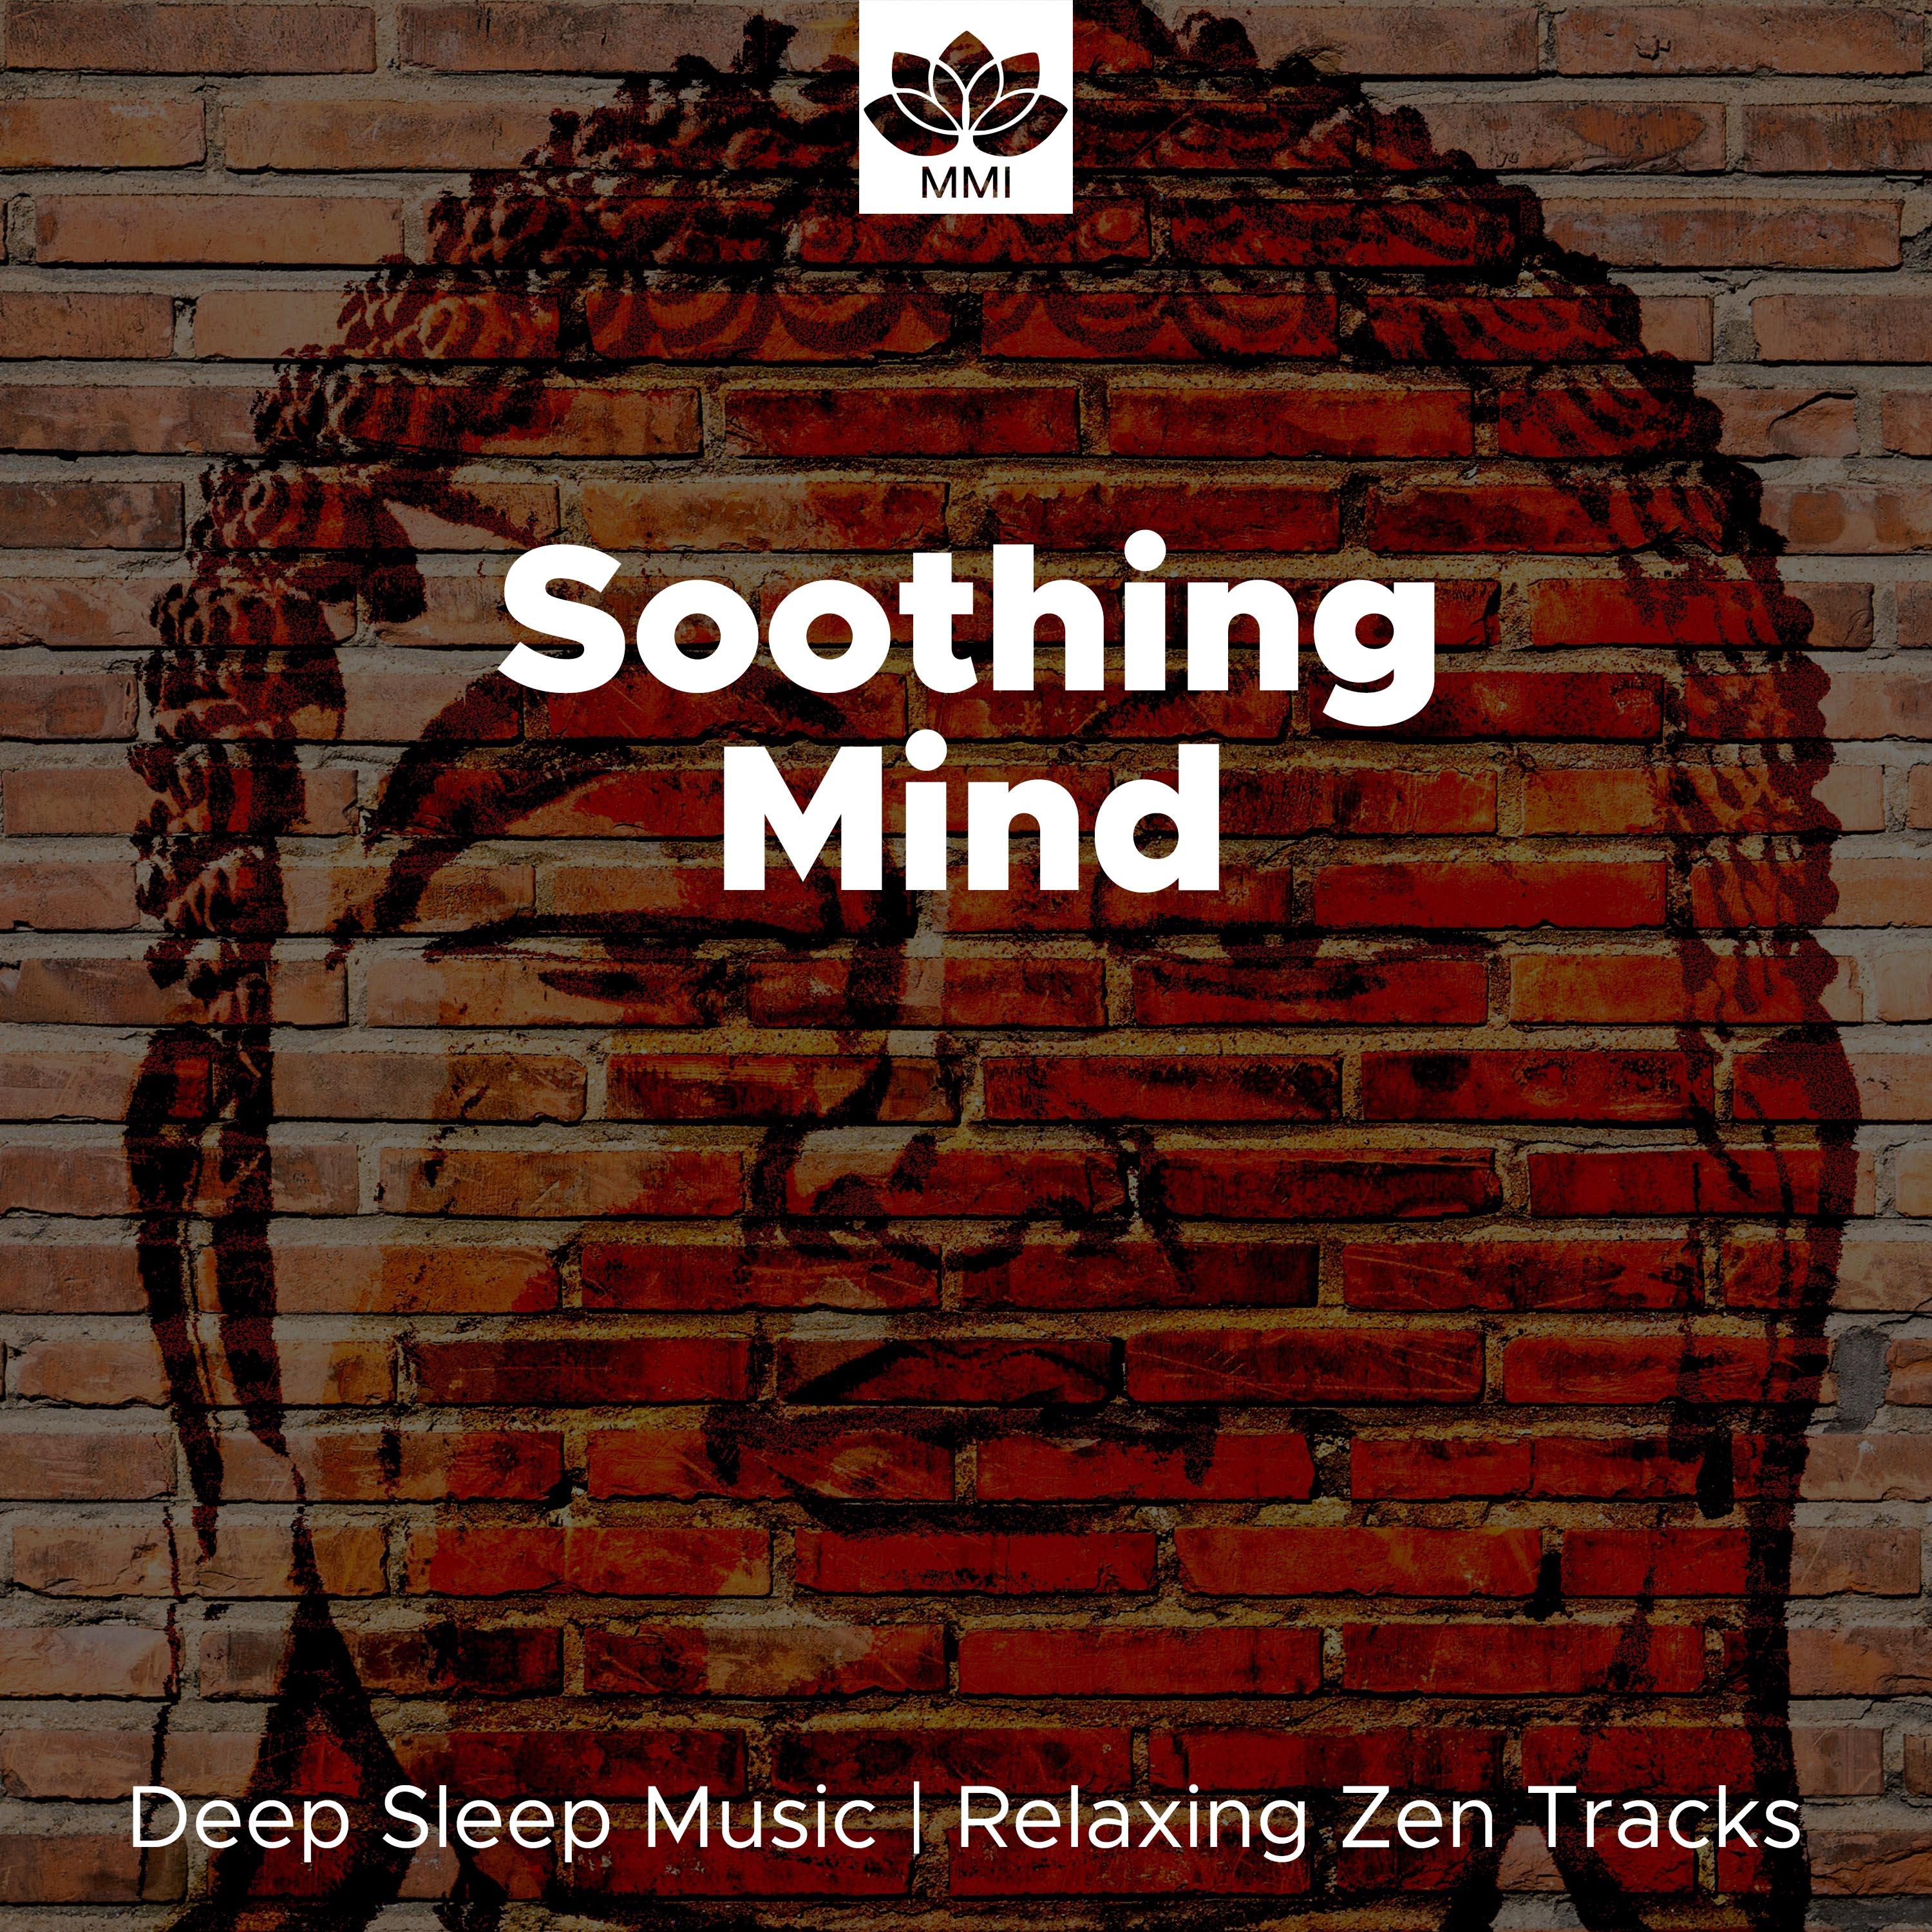 Soothing Mind: Deep Sleep Music, Soothing Ocean Waves, Relaxing Zen Tracks, Sounds of Nature, Soothe your Soul, Rain & Ocean sounds, Sleep Therapy